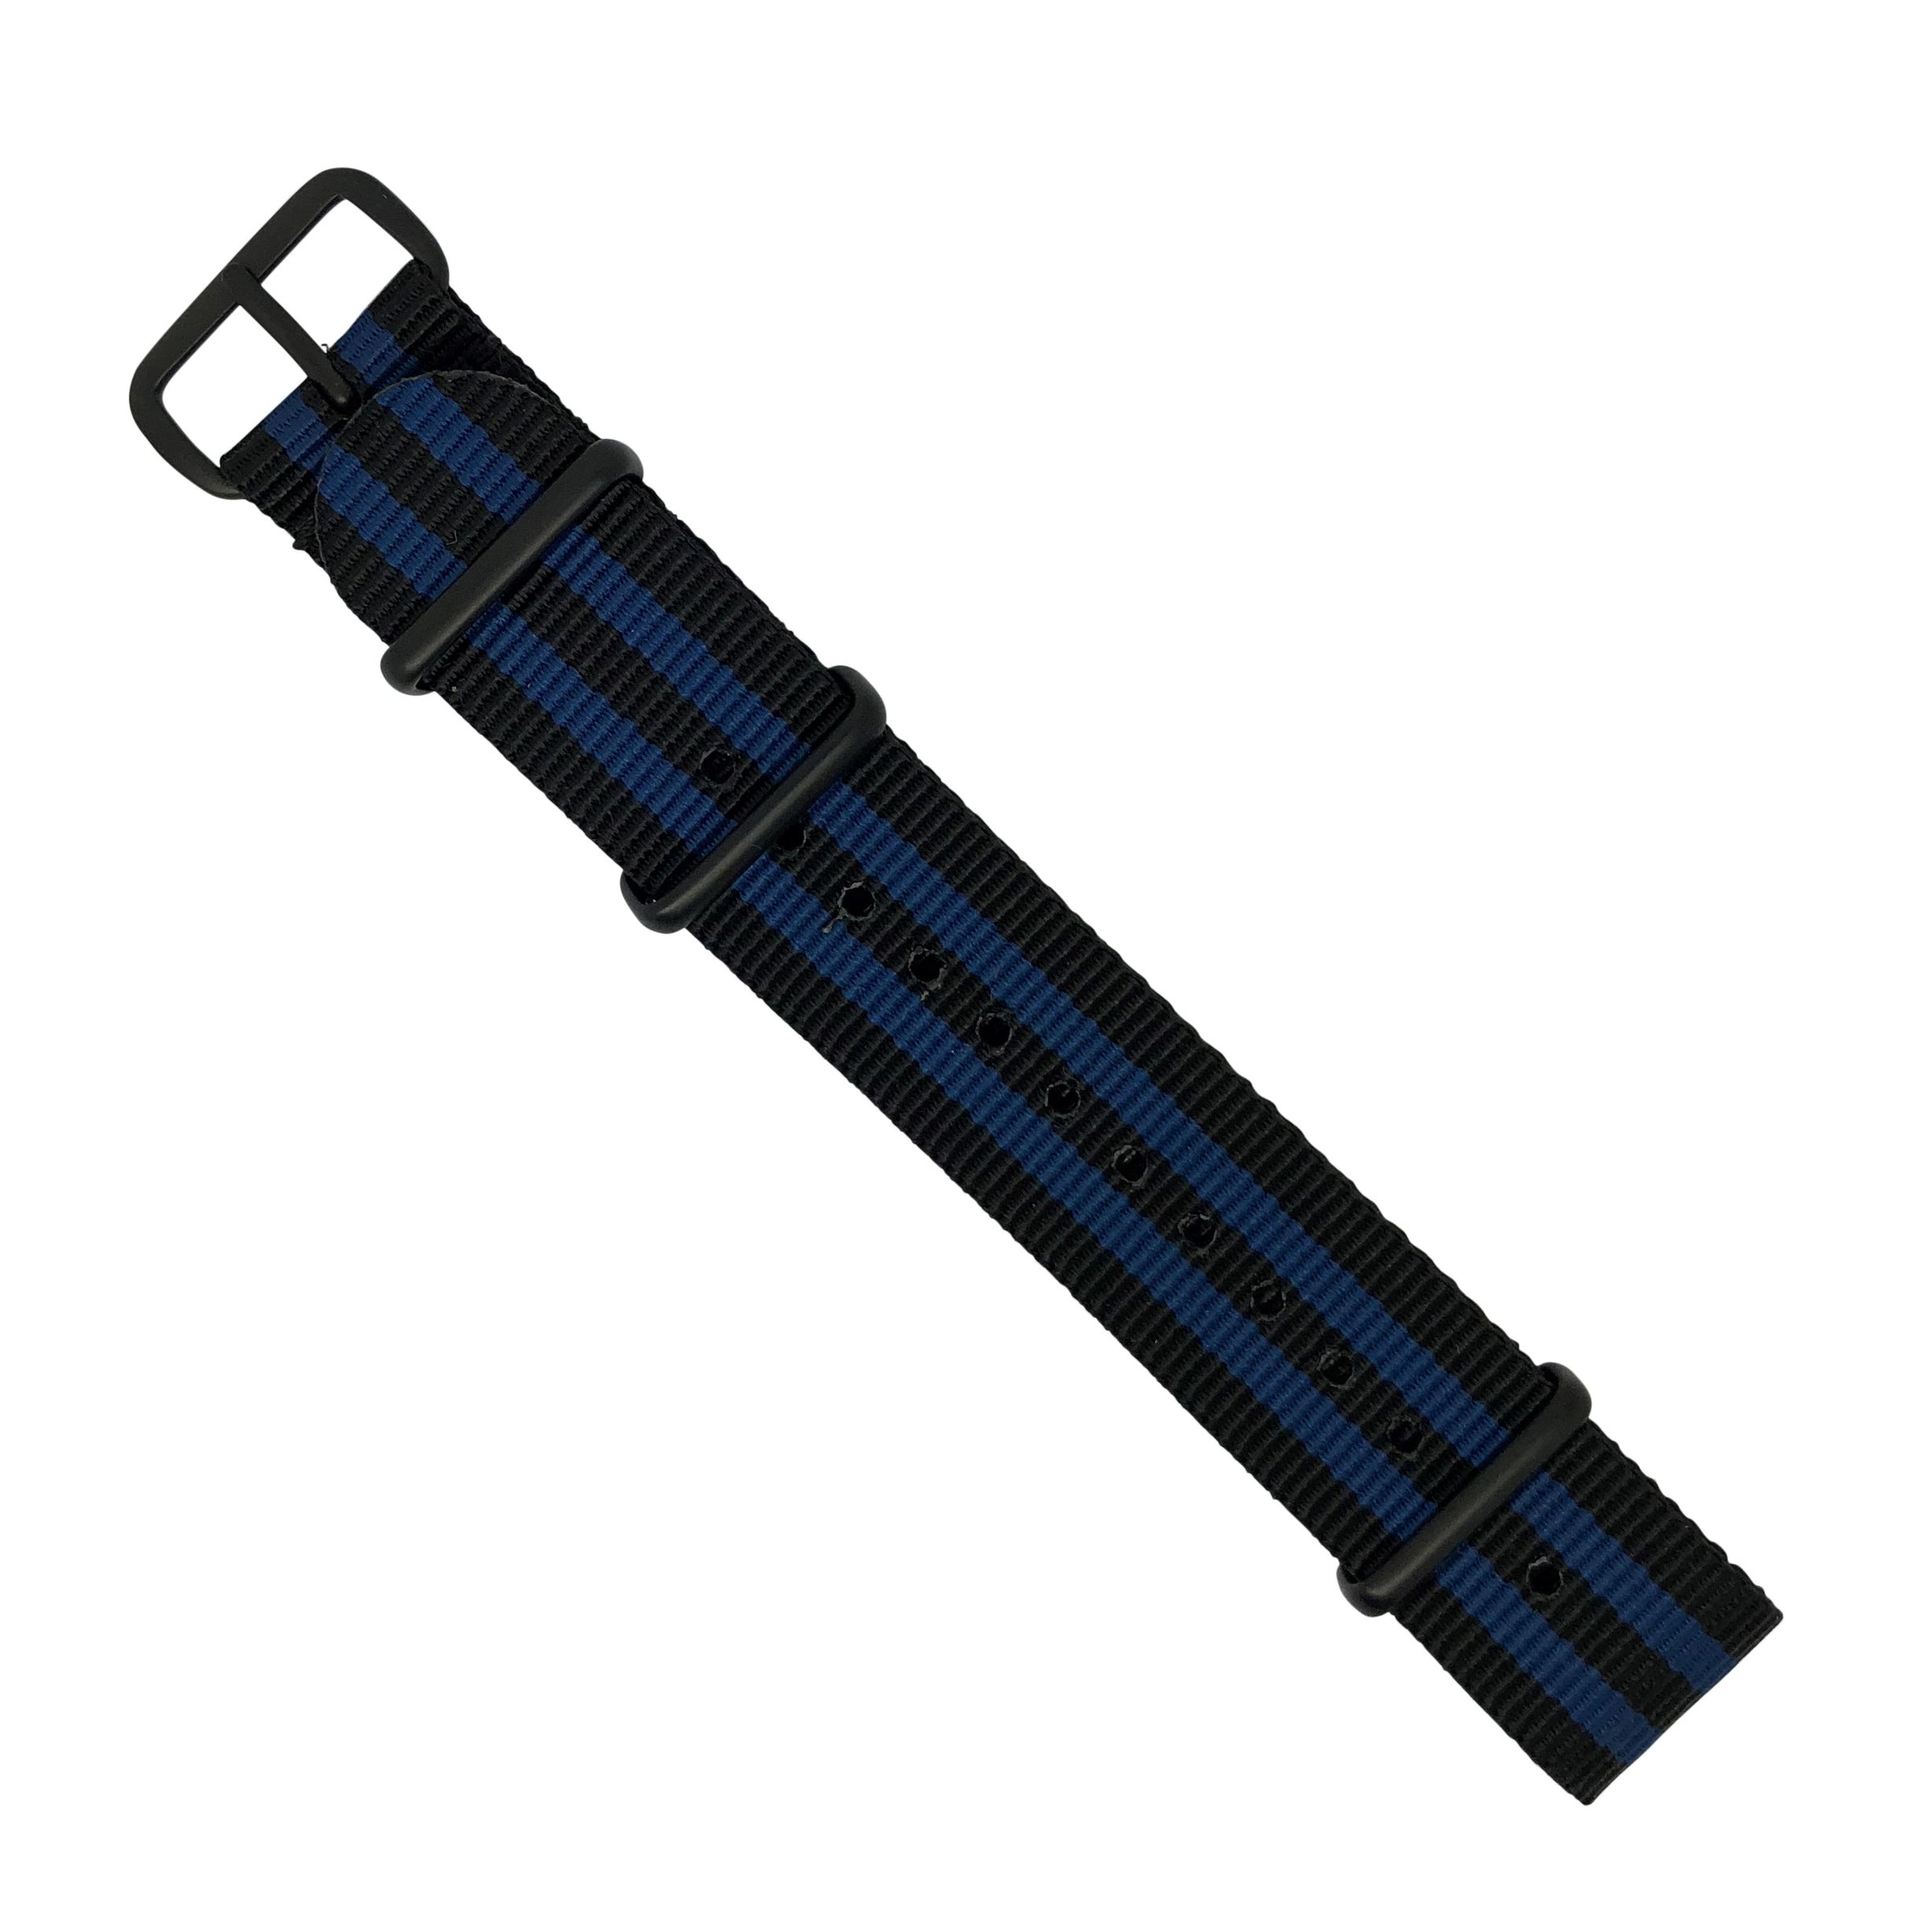 Premium Nato Strap in Black Blue Small Stripes - Nomad Watch Works MY